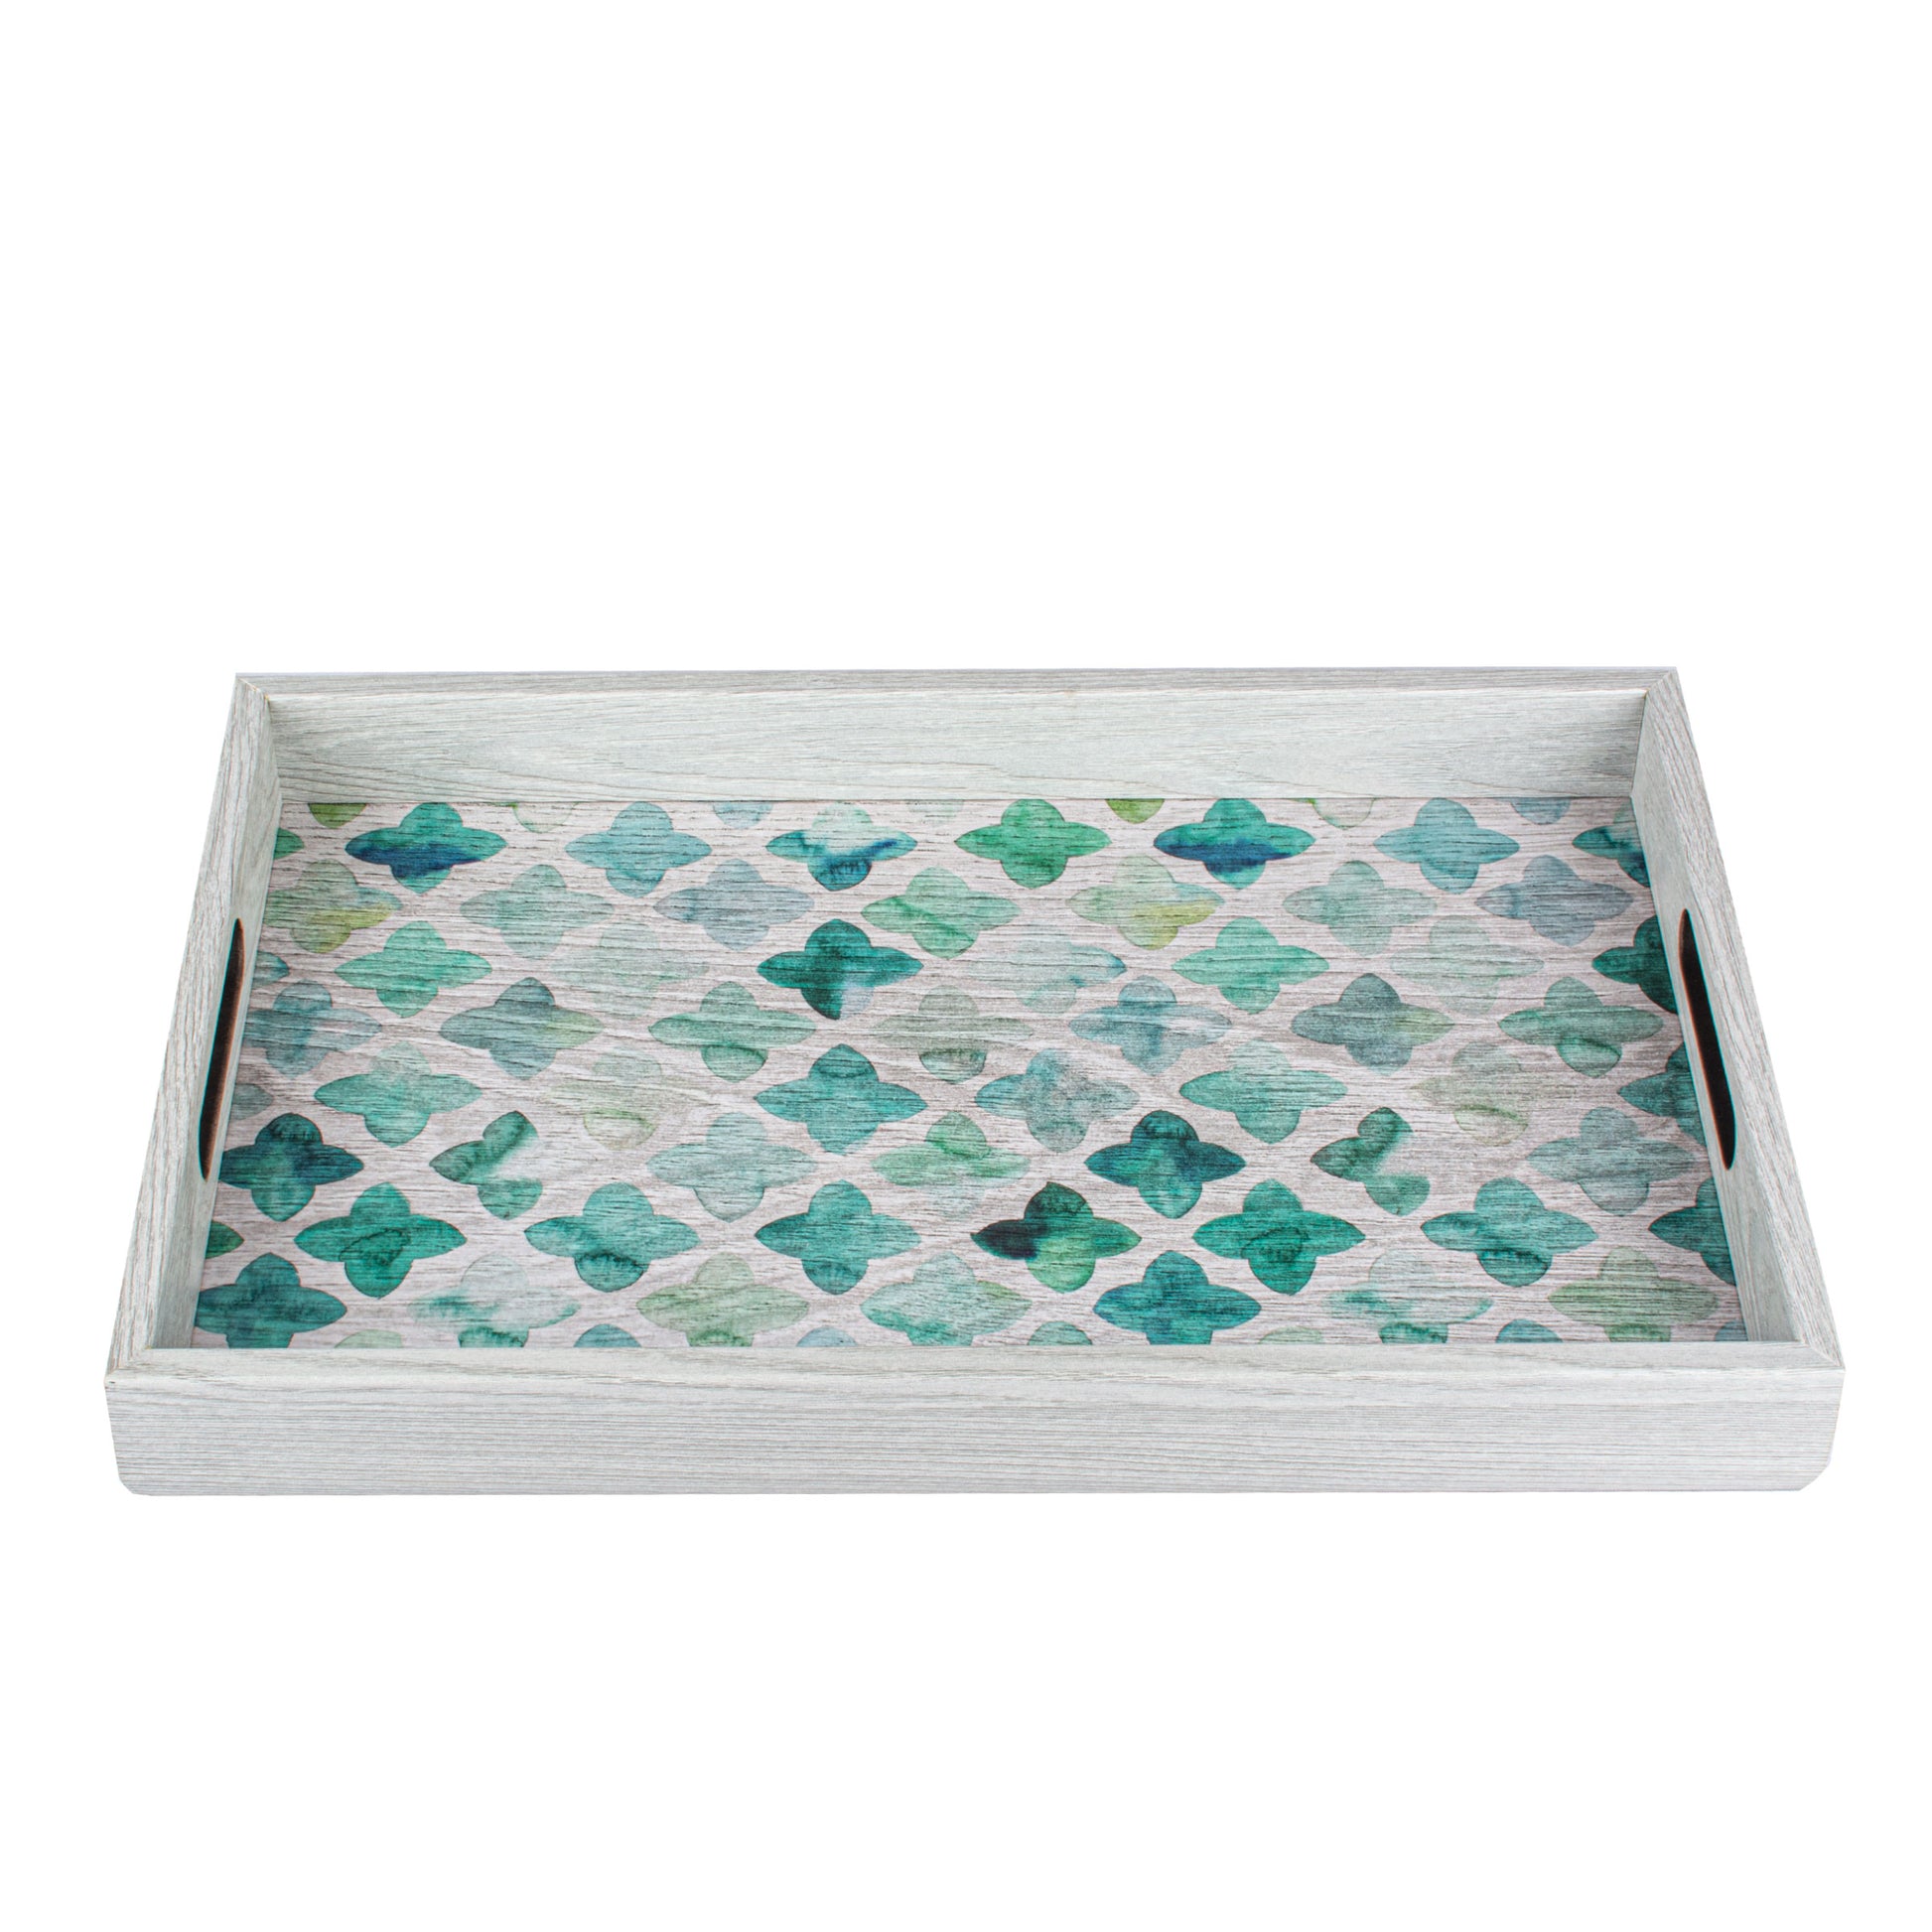 Artistic Wooden Tray with Green Mosaic Printed Design - Luxury Game Room Decor - Premium Decorative Objects from MANOPOULOS Chess & Backgammon - Just €25! Shop now at MANOPOULOS Chess & Backgammon